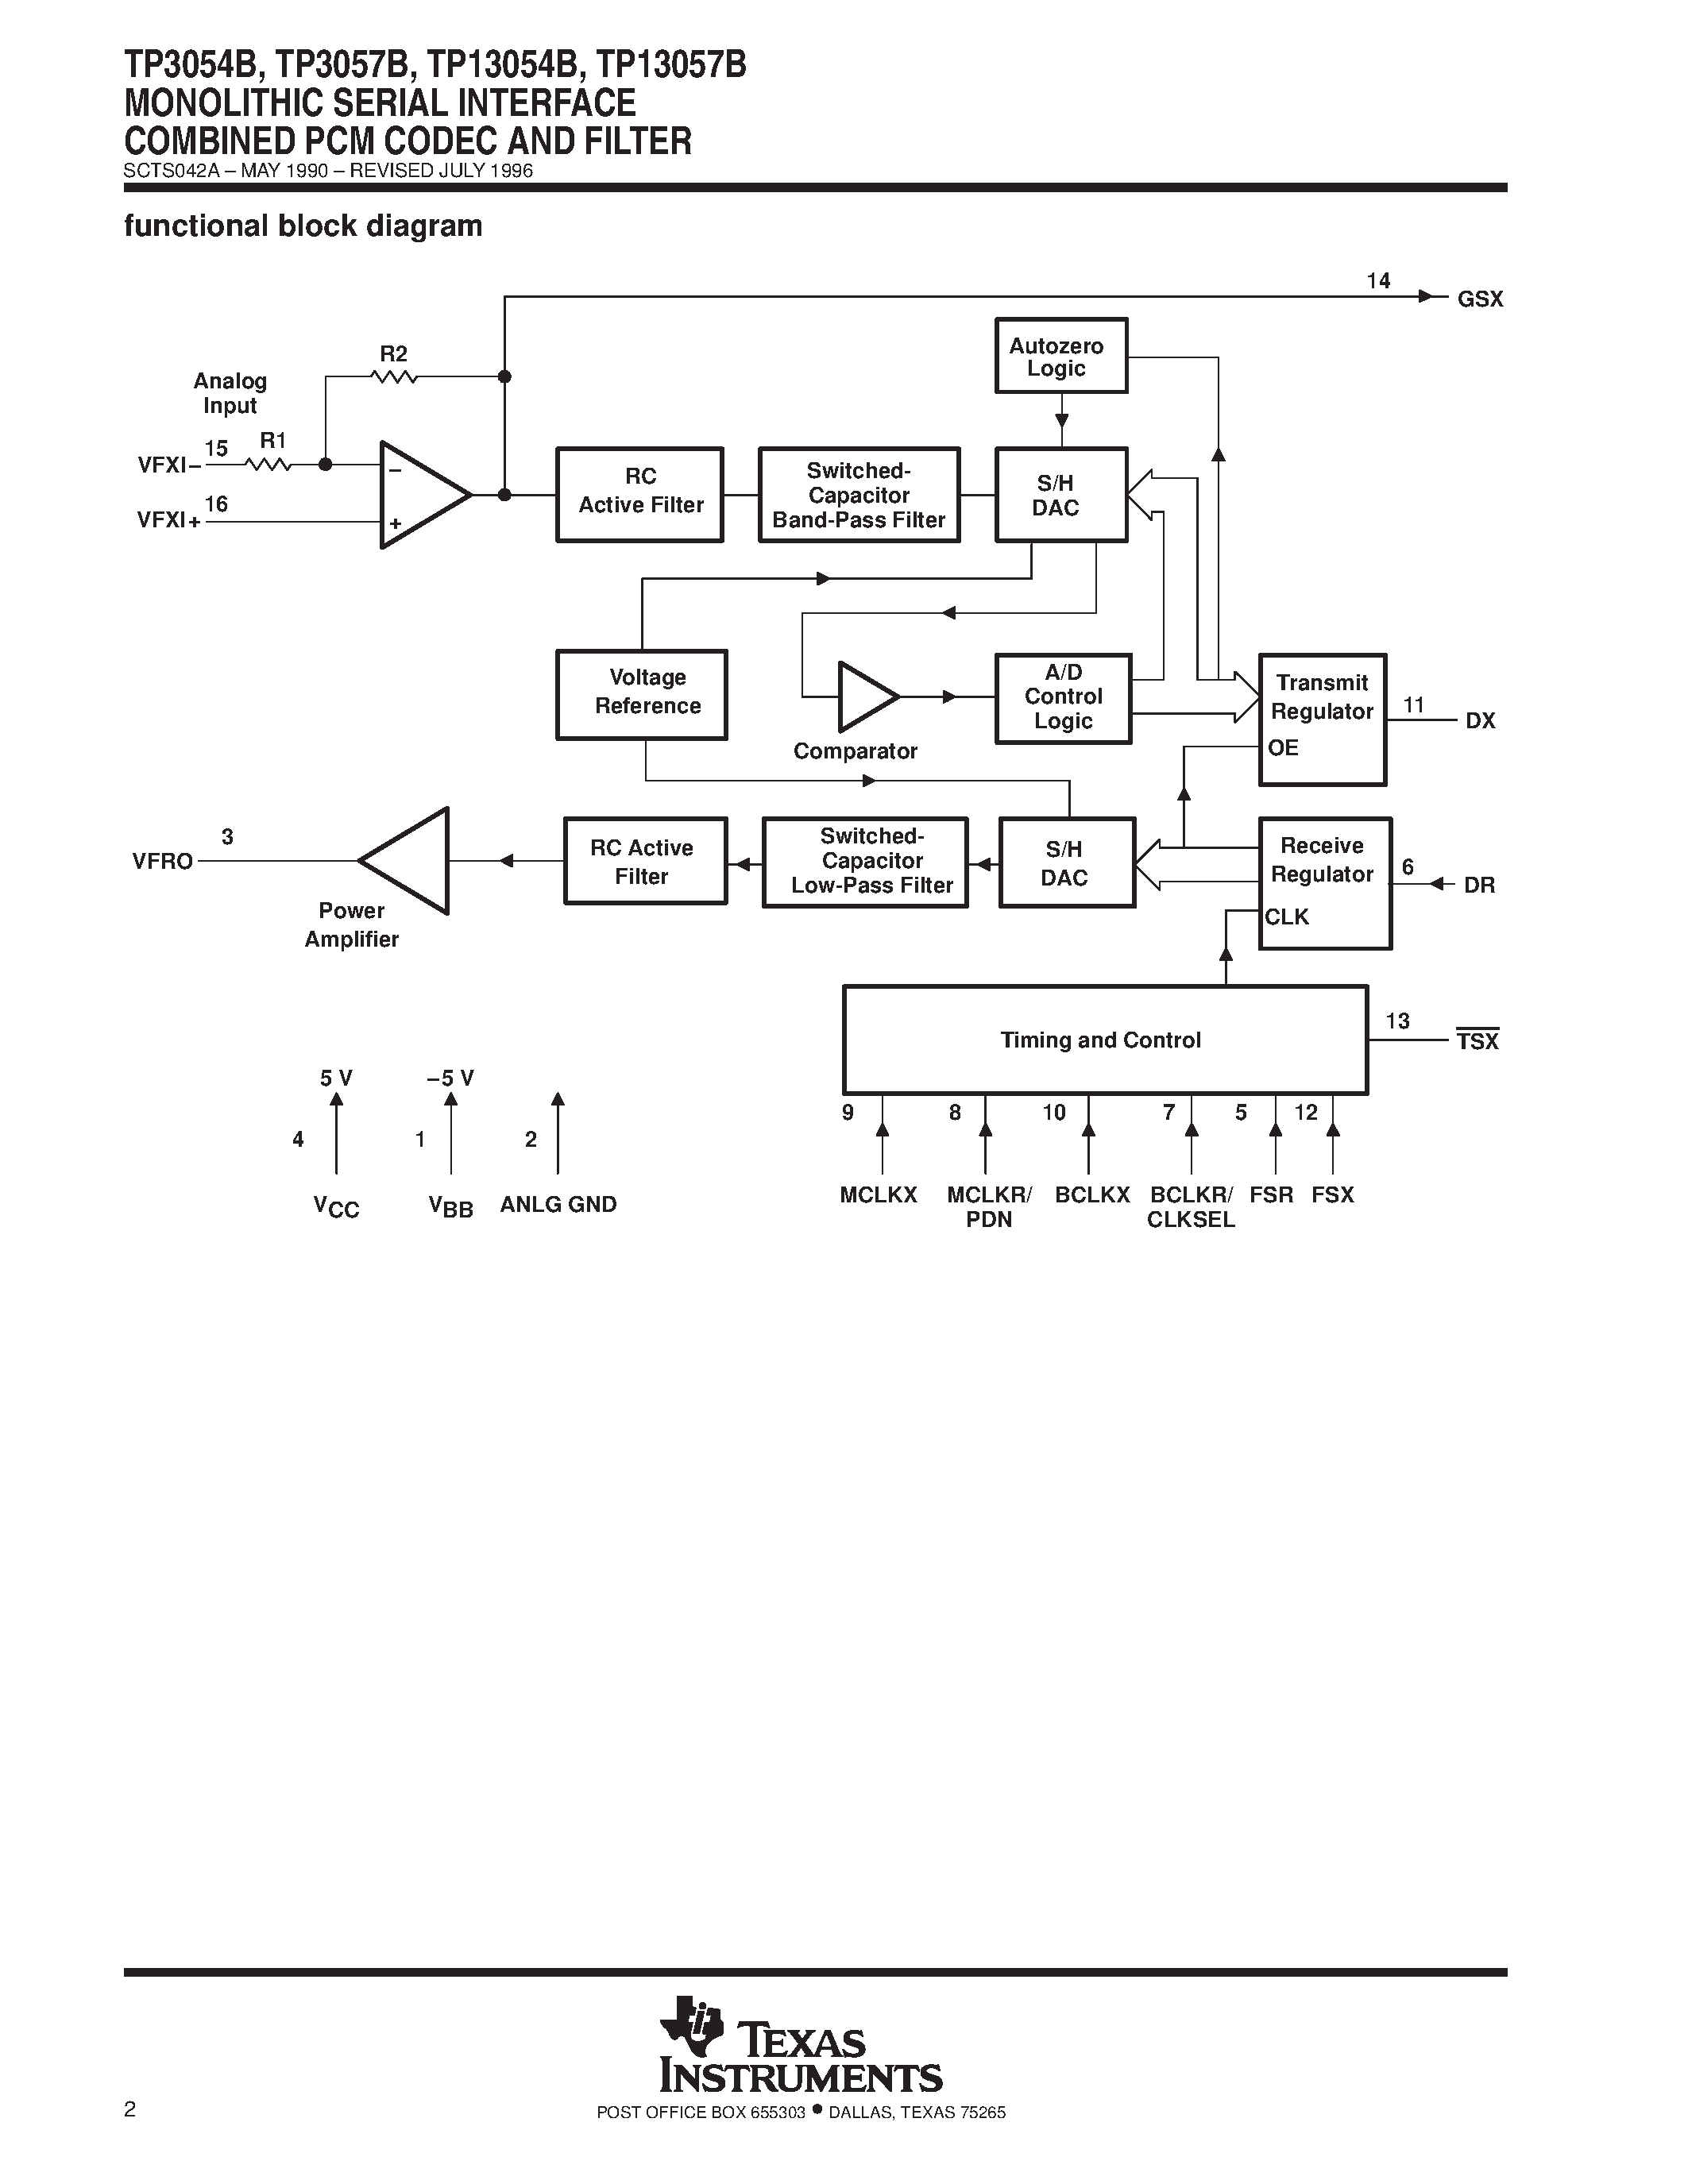 Datasheet TP13057B - MONOLITHIC SERIAL INTERFACE COMBINED PCM CODEC AND FILTER page 2